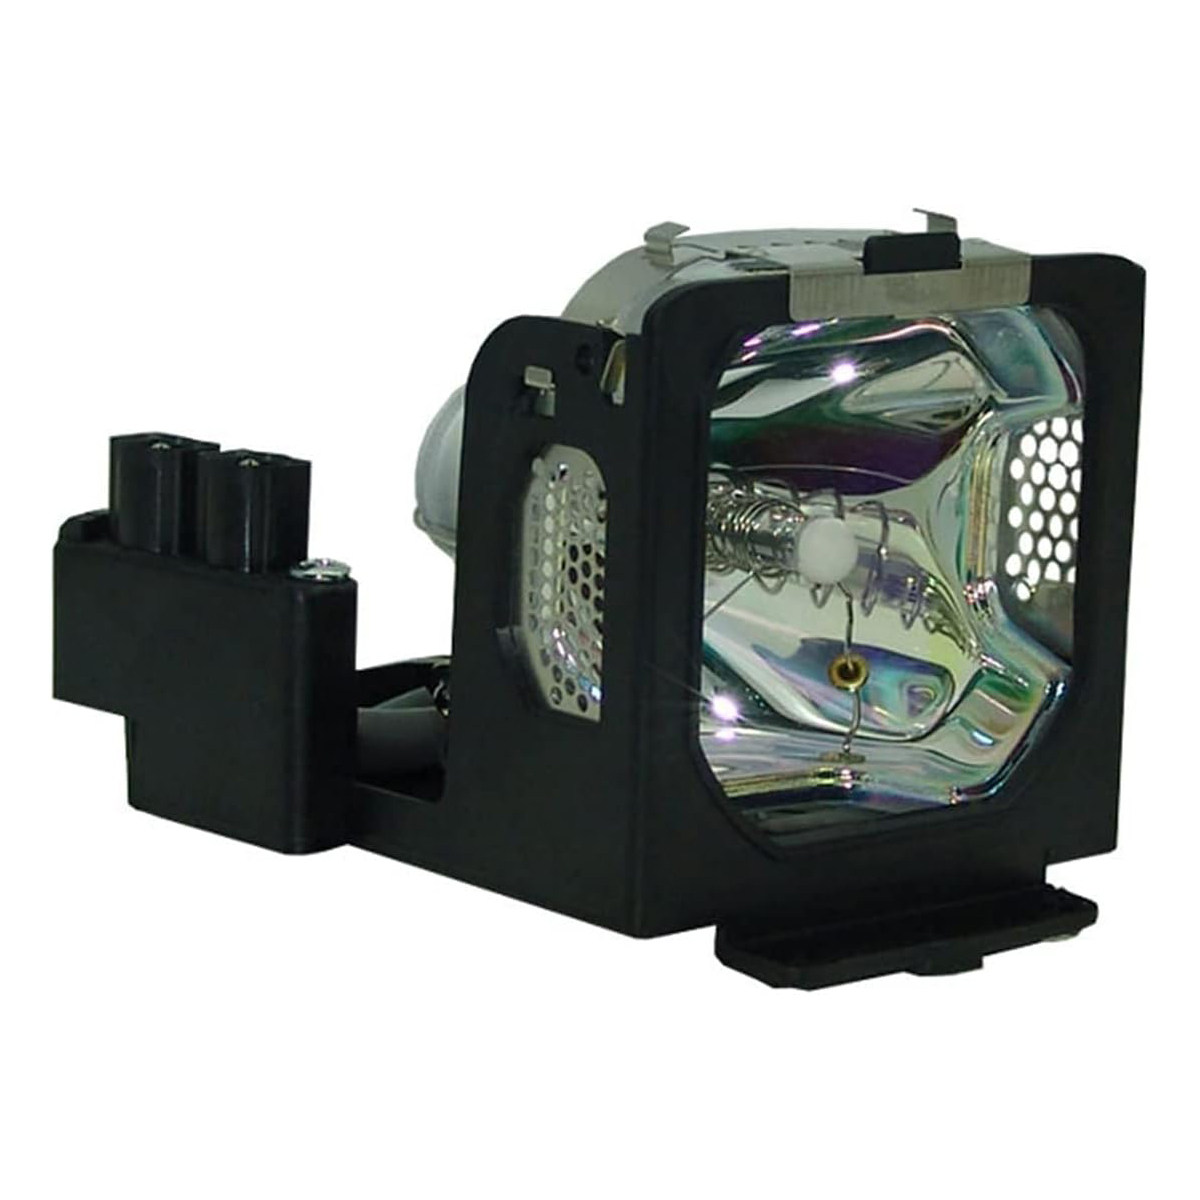 Replacement Projector lamp LV-LP12/7566A001AA For CANON LV-S1 LV-X1